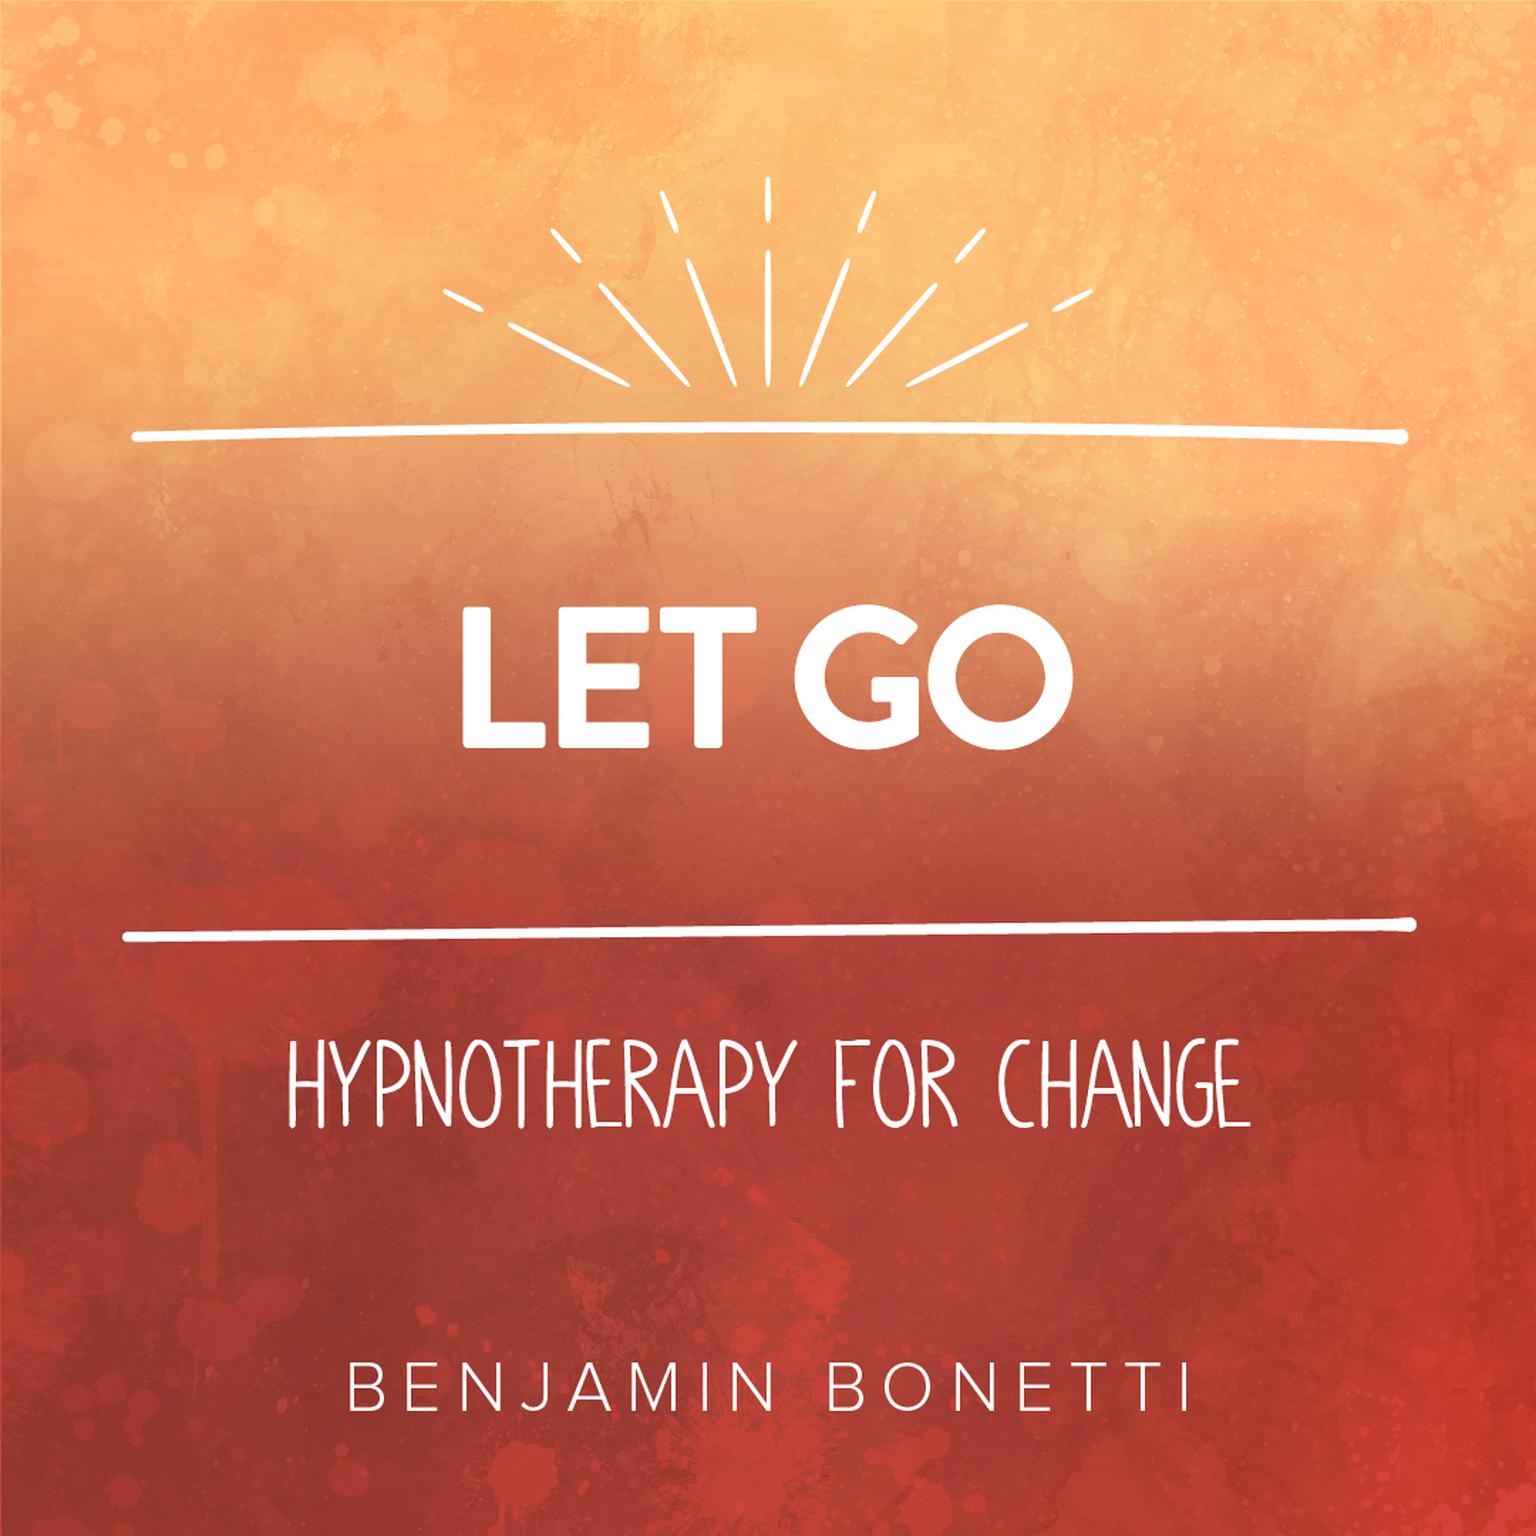 Let Go - Hypnotherapy For Change Audiobook, by Benjamin  Bonetti